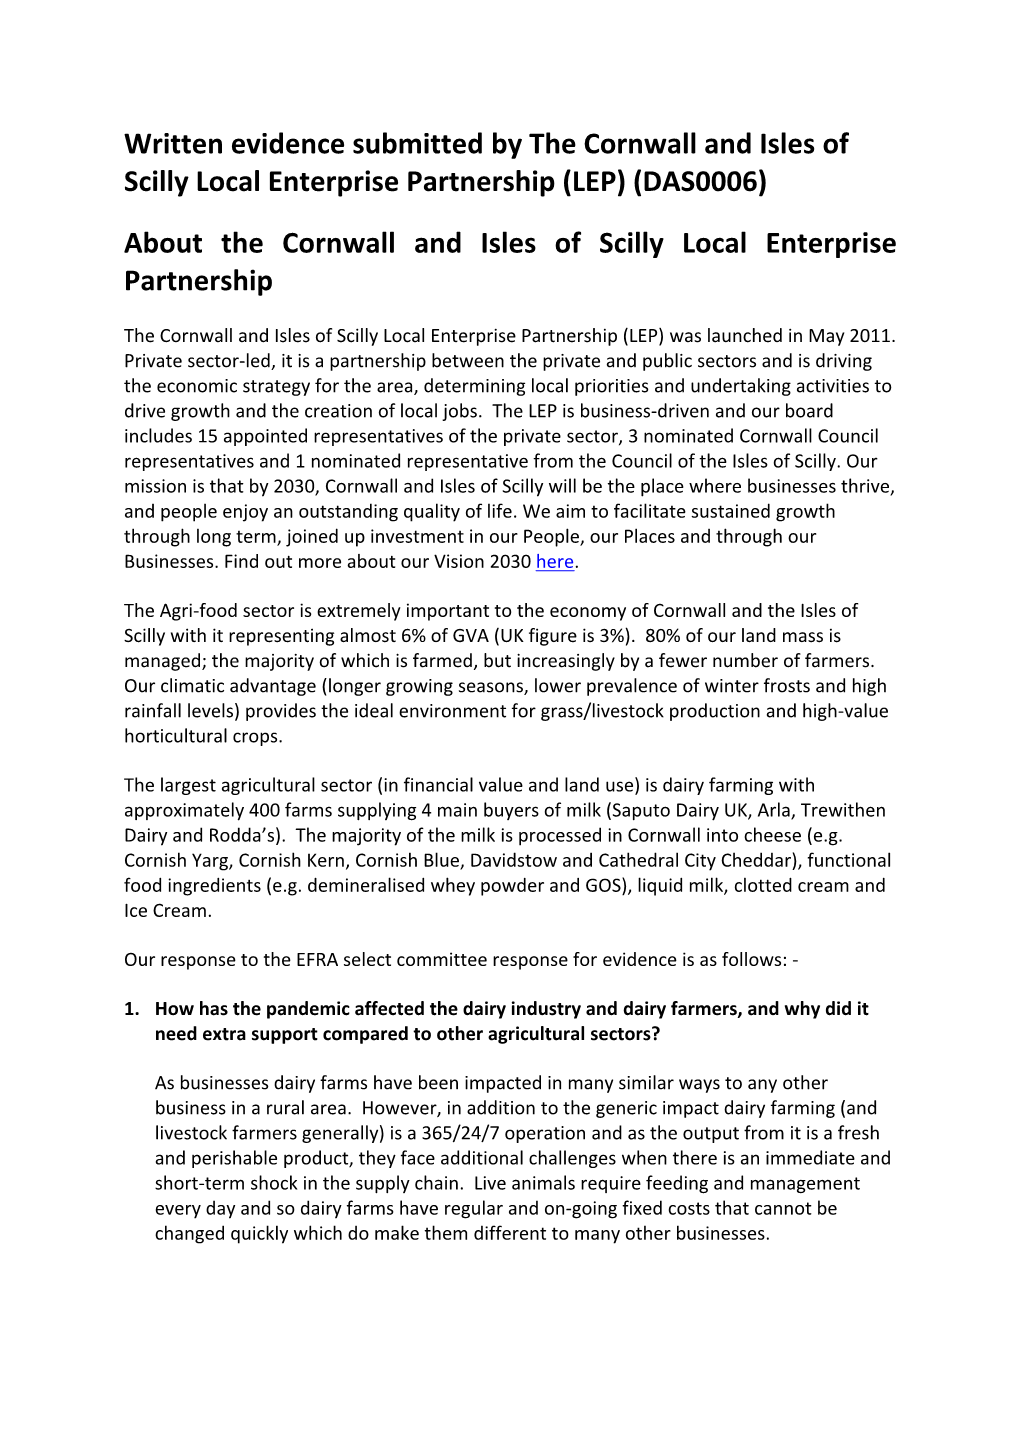 Written Evidence Submitted by the Cornwall and Isles of Scilly Local Enterprise Partnership